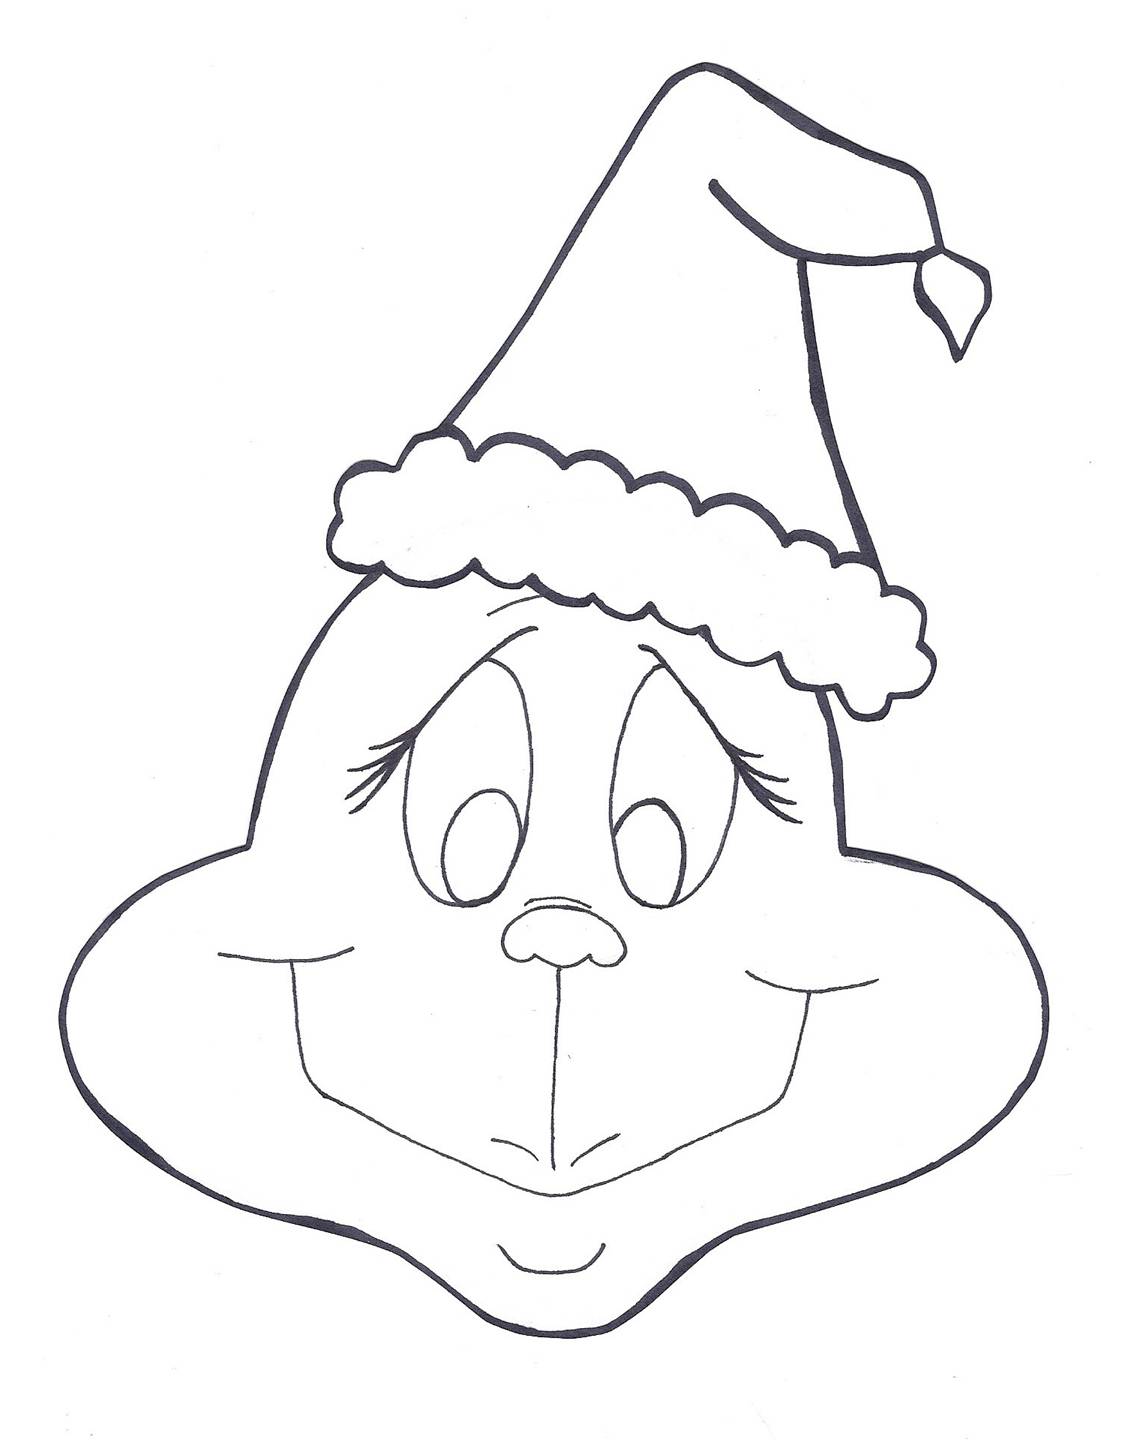 Download Grinch Christmas Coloring Pages Printable Drawing Free Image Download